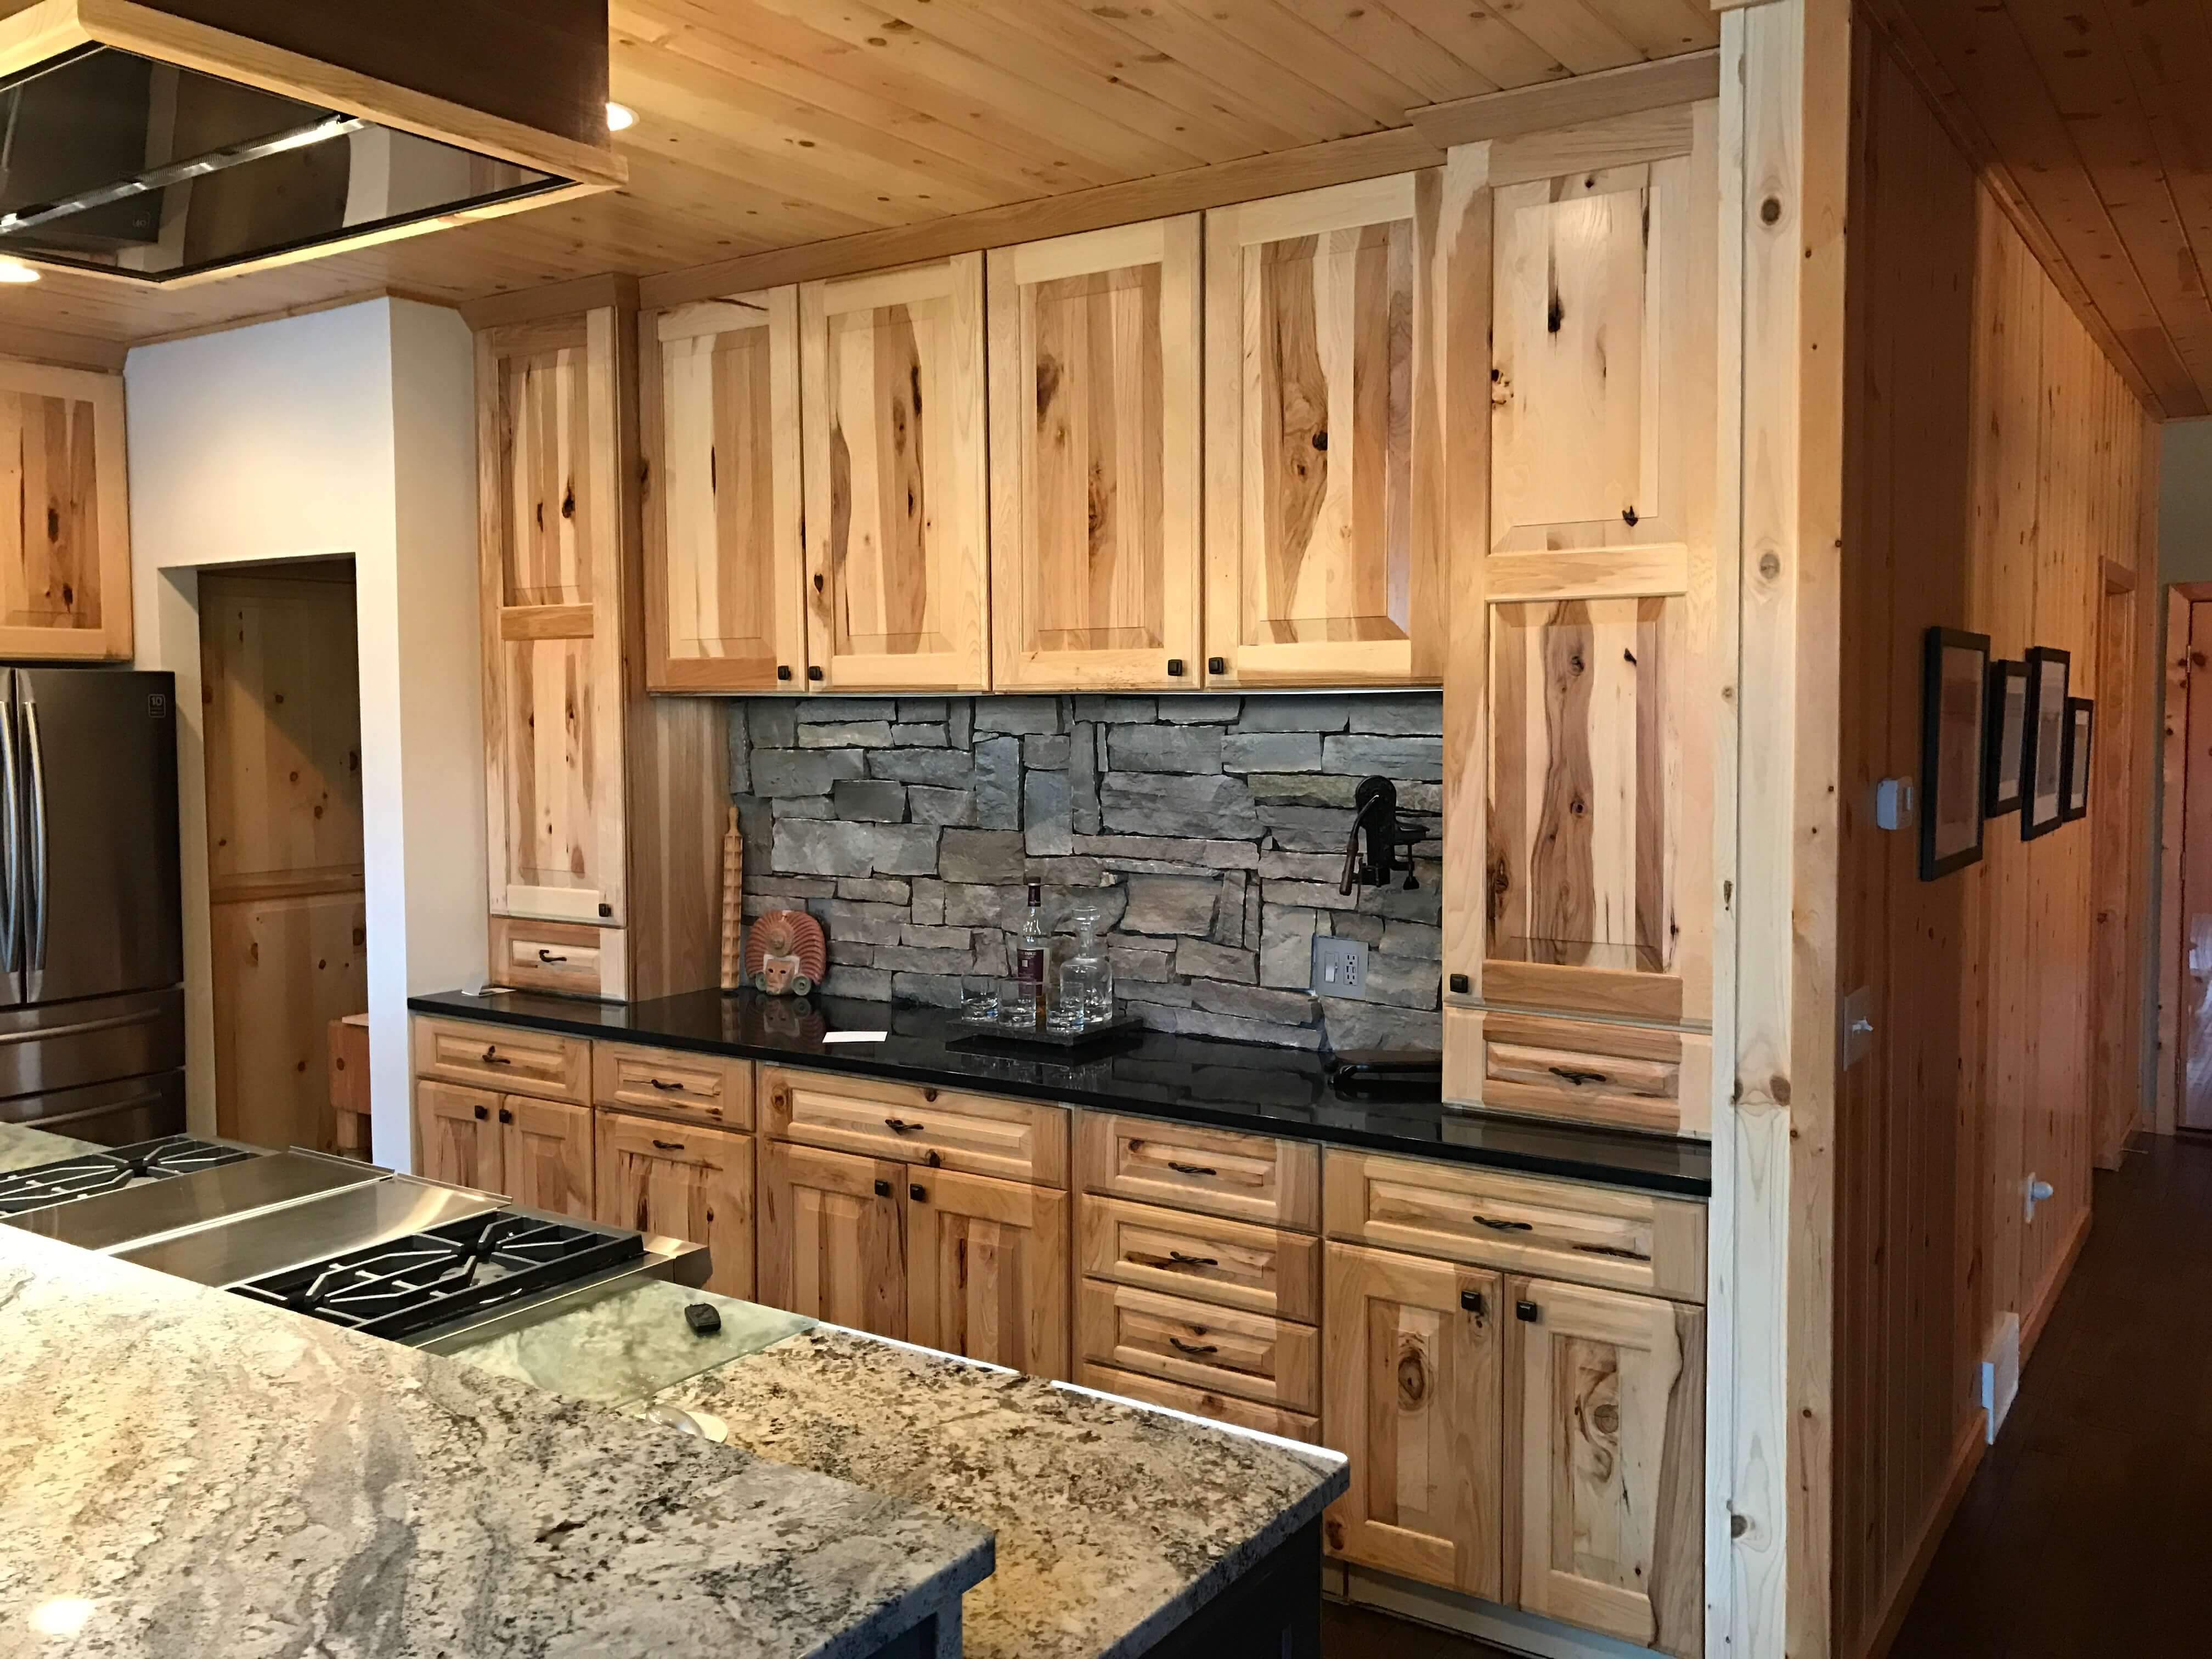 Knotty And Nice Part 2 Explore The Options With Hickory Rustic Hickory Cabinetry Dura Supreme Cabinetry